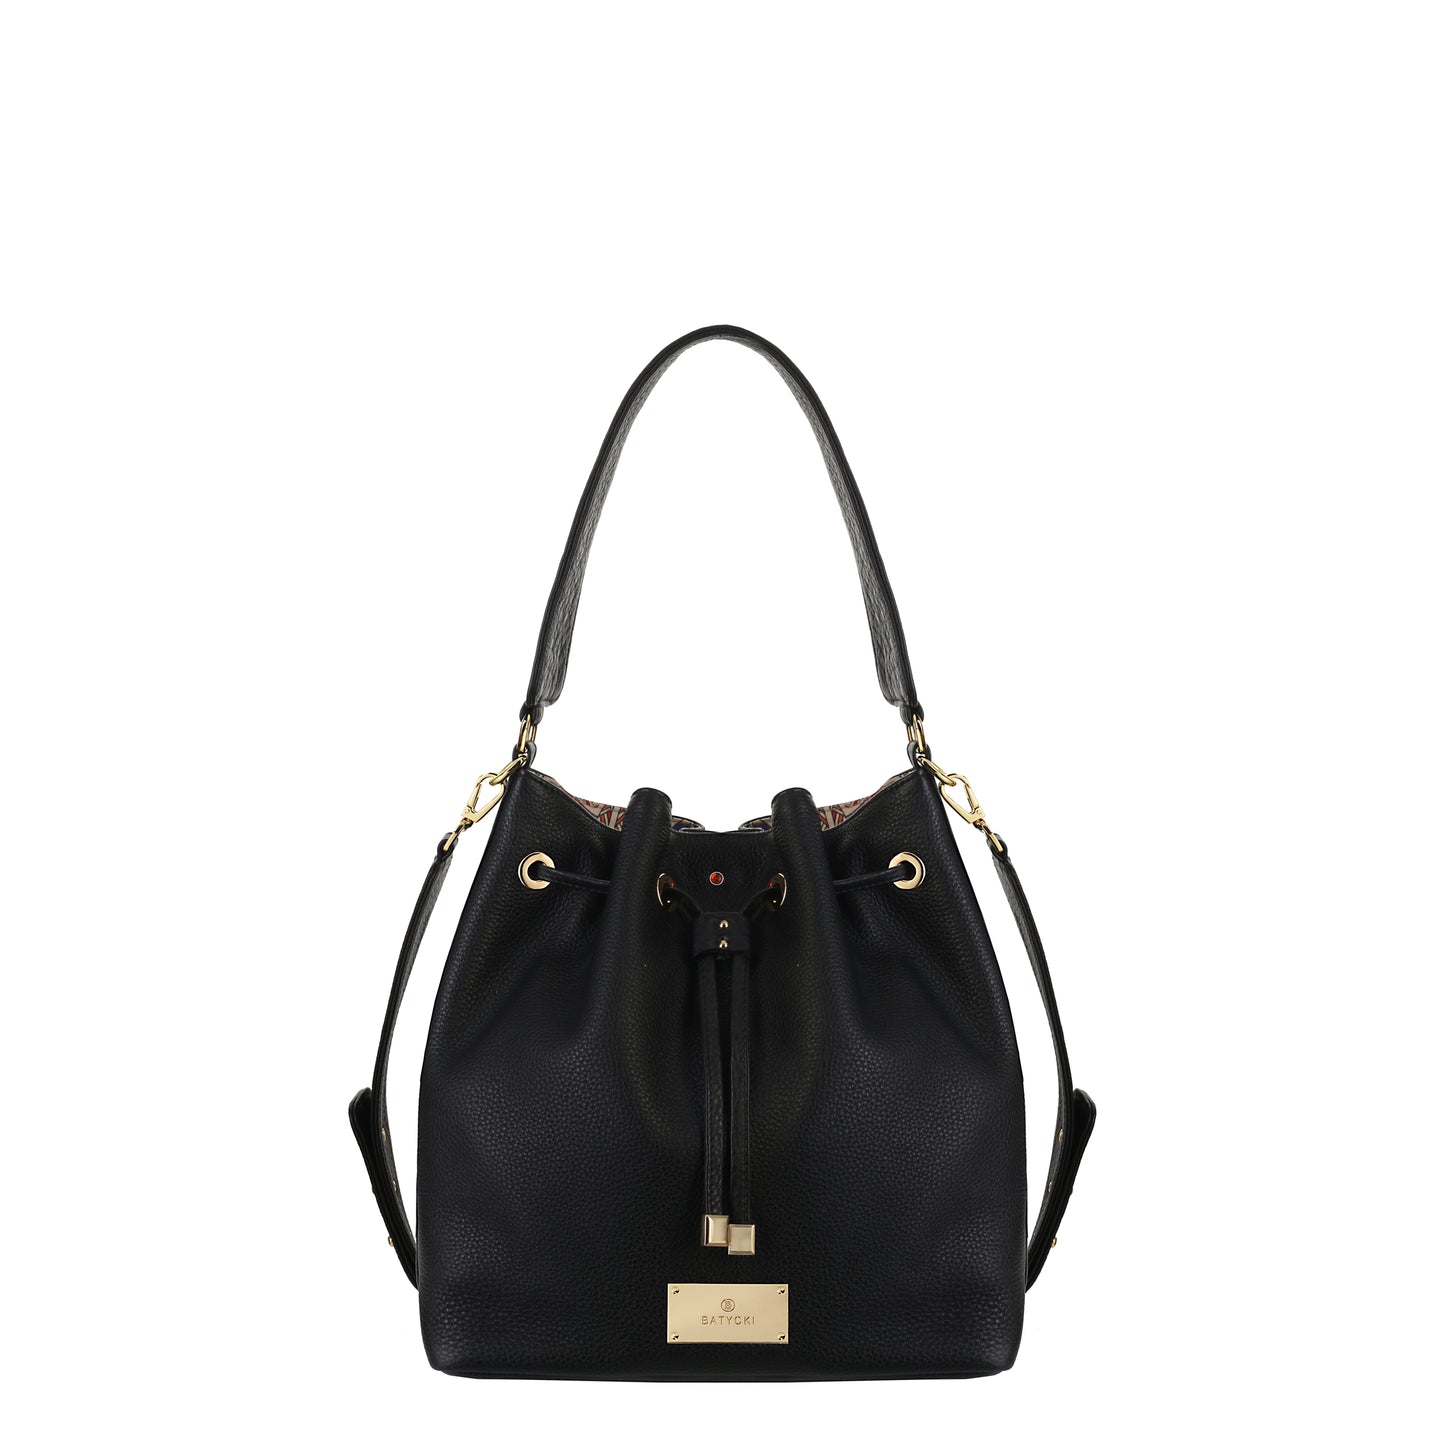 BE RELAXED leather bag women's bag floter black